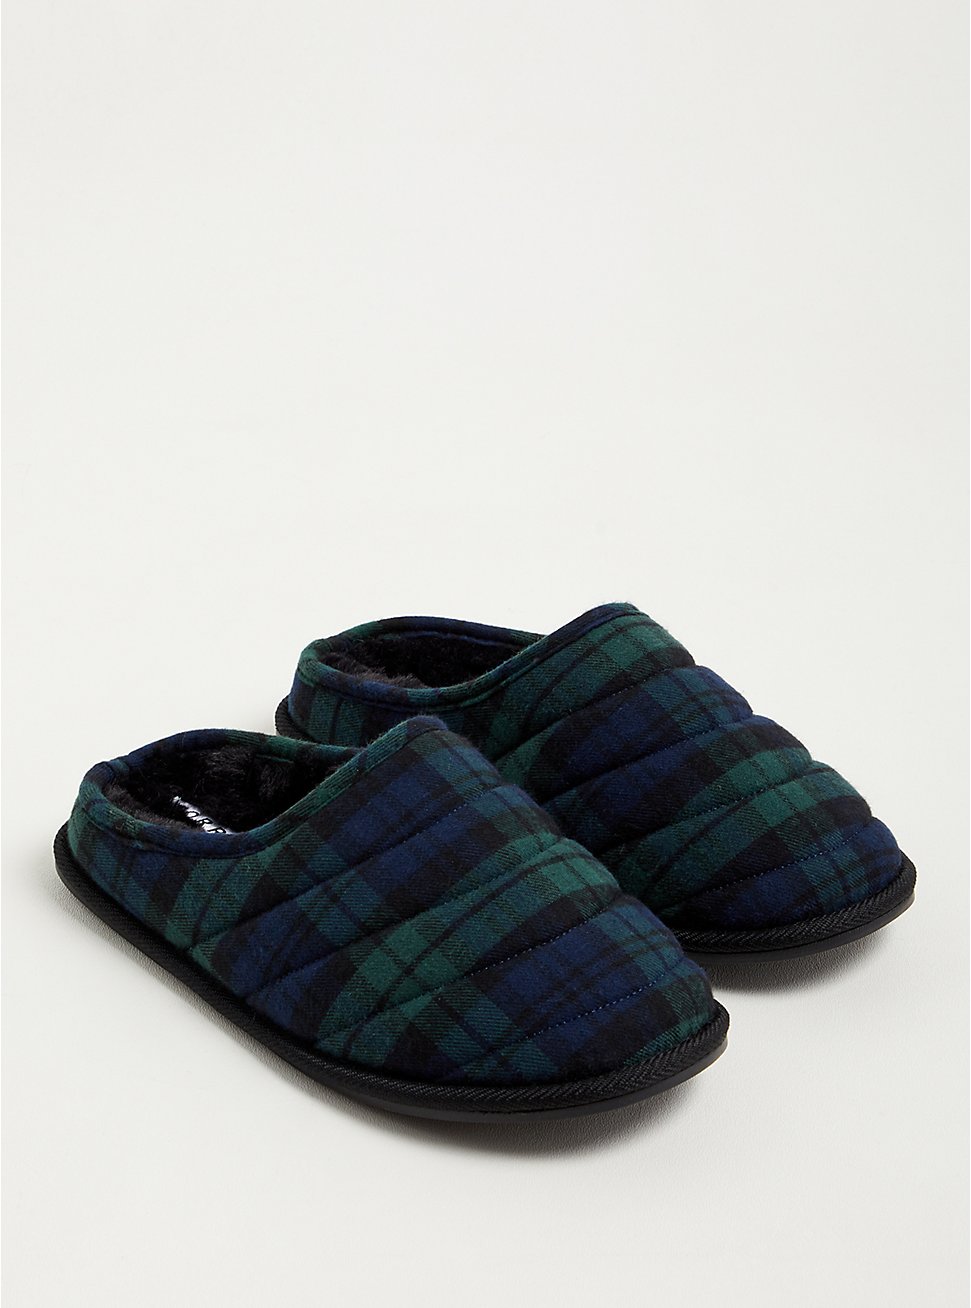 Plus Size Quilted Slip-On Slipper - Blue & Green Plaid (WW), RED, hi-res